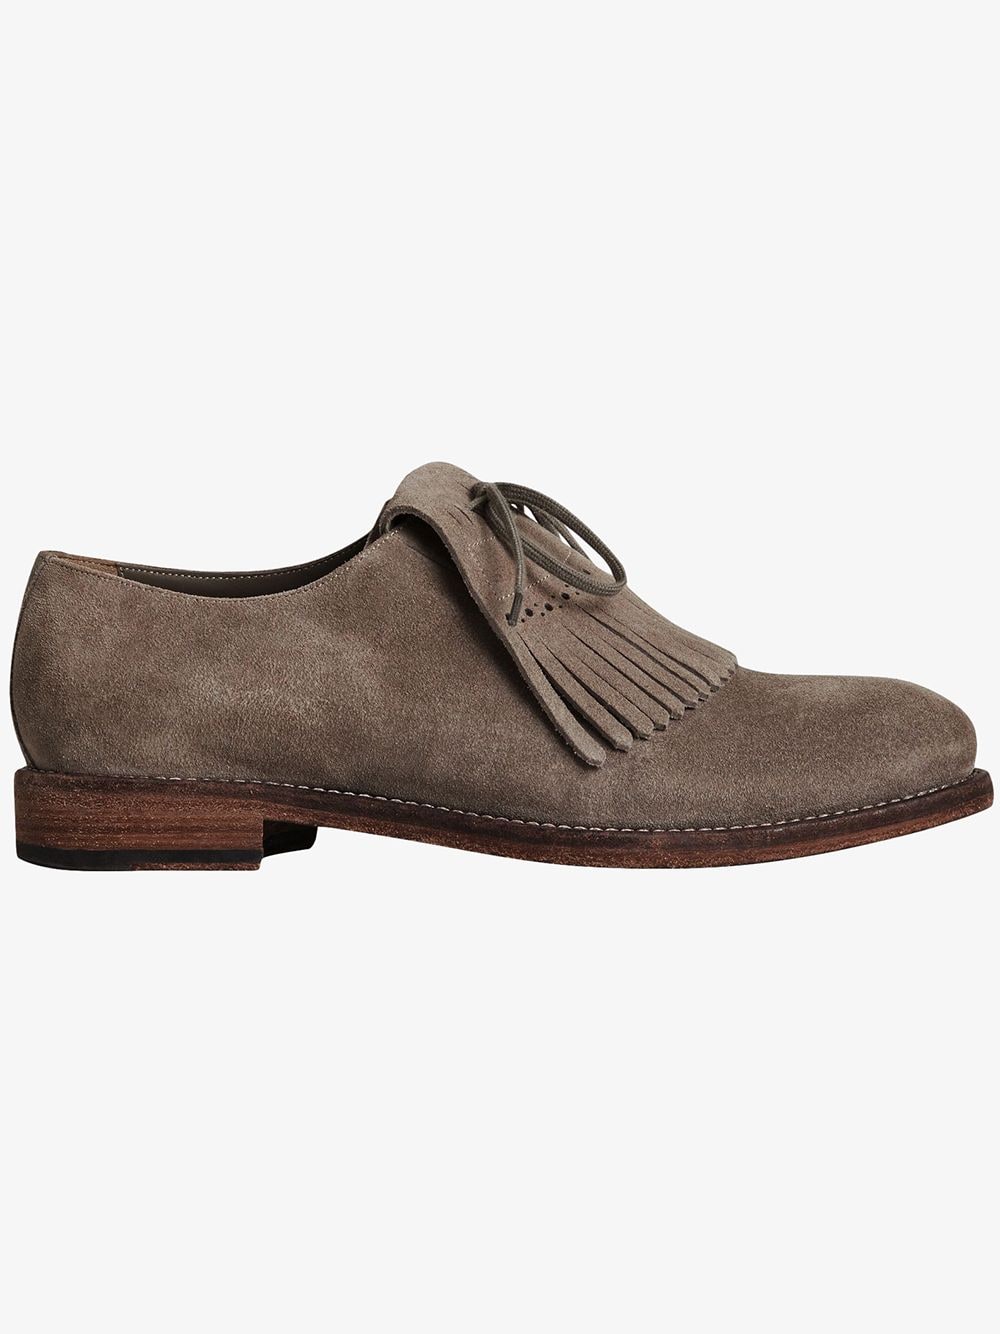 Burberry Lace-up Kiltie Fringe Suede Loafers - Grey von Burberry